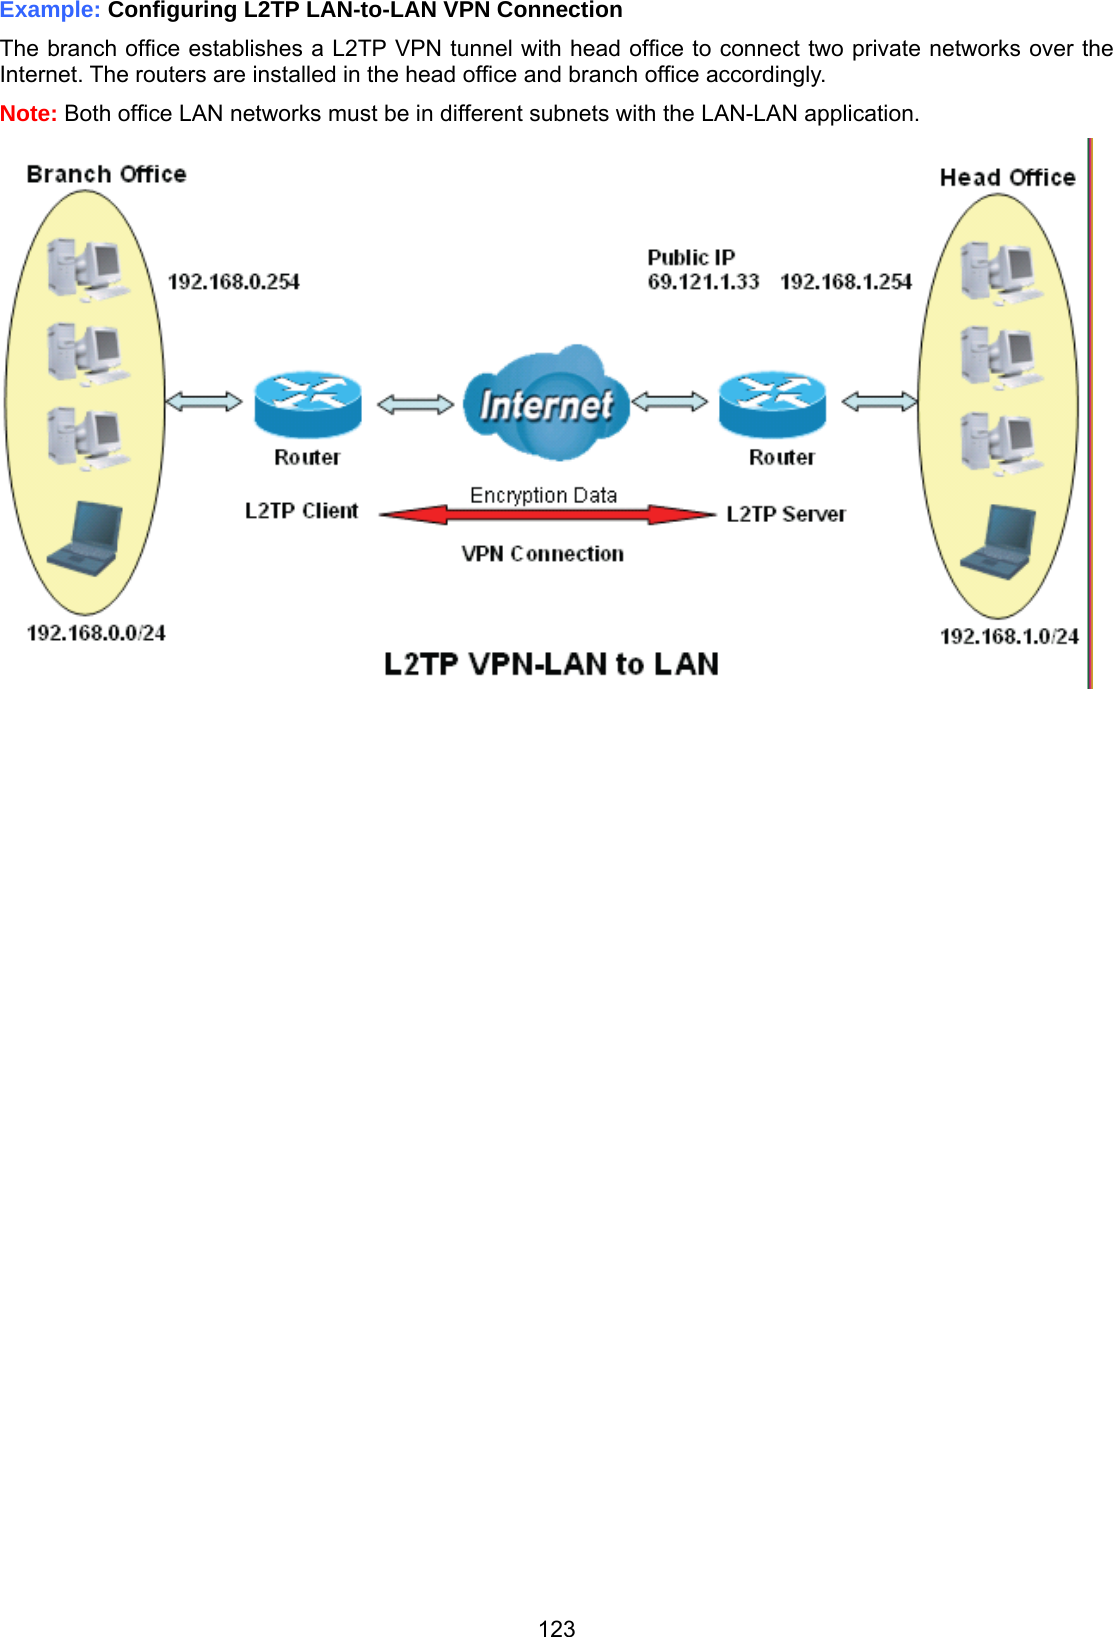 123 Example: Configuring L2TP LAN-to-LAN VPN Connection The branch office establishes a L2TP VPN tunnel with head office to connect two private networks over the Internet. The routers are installed in the head office and branch office accordingly. Note: Both office LAN networks must be in different subnets with the LAN-LAN application.   